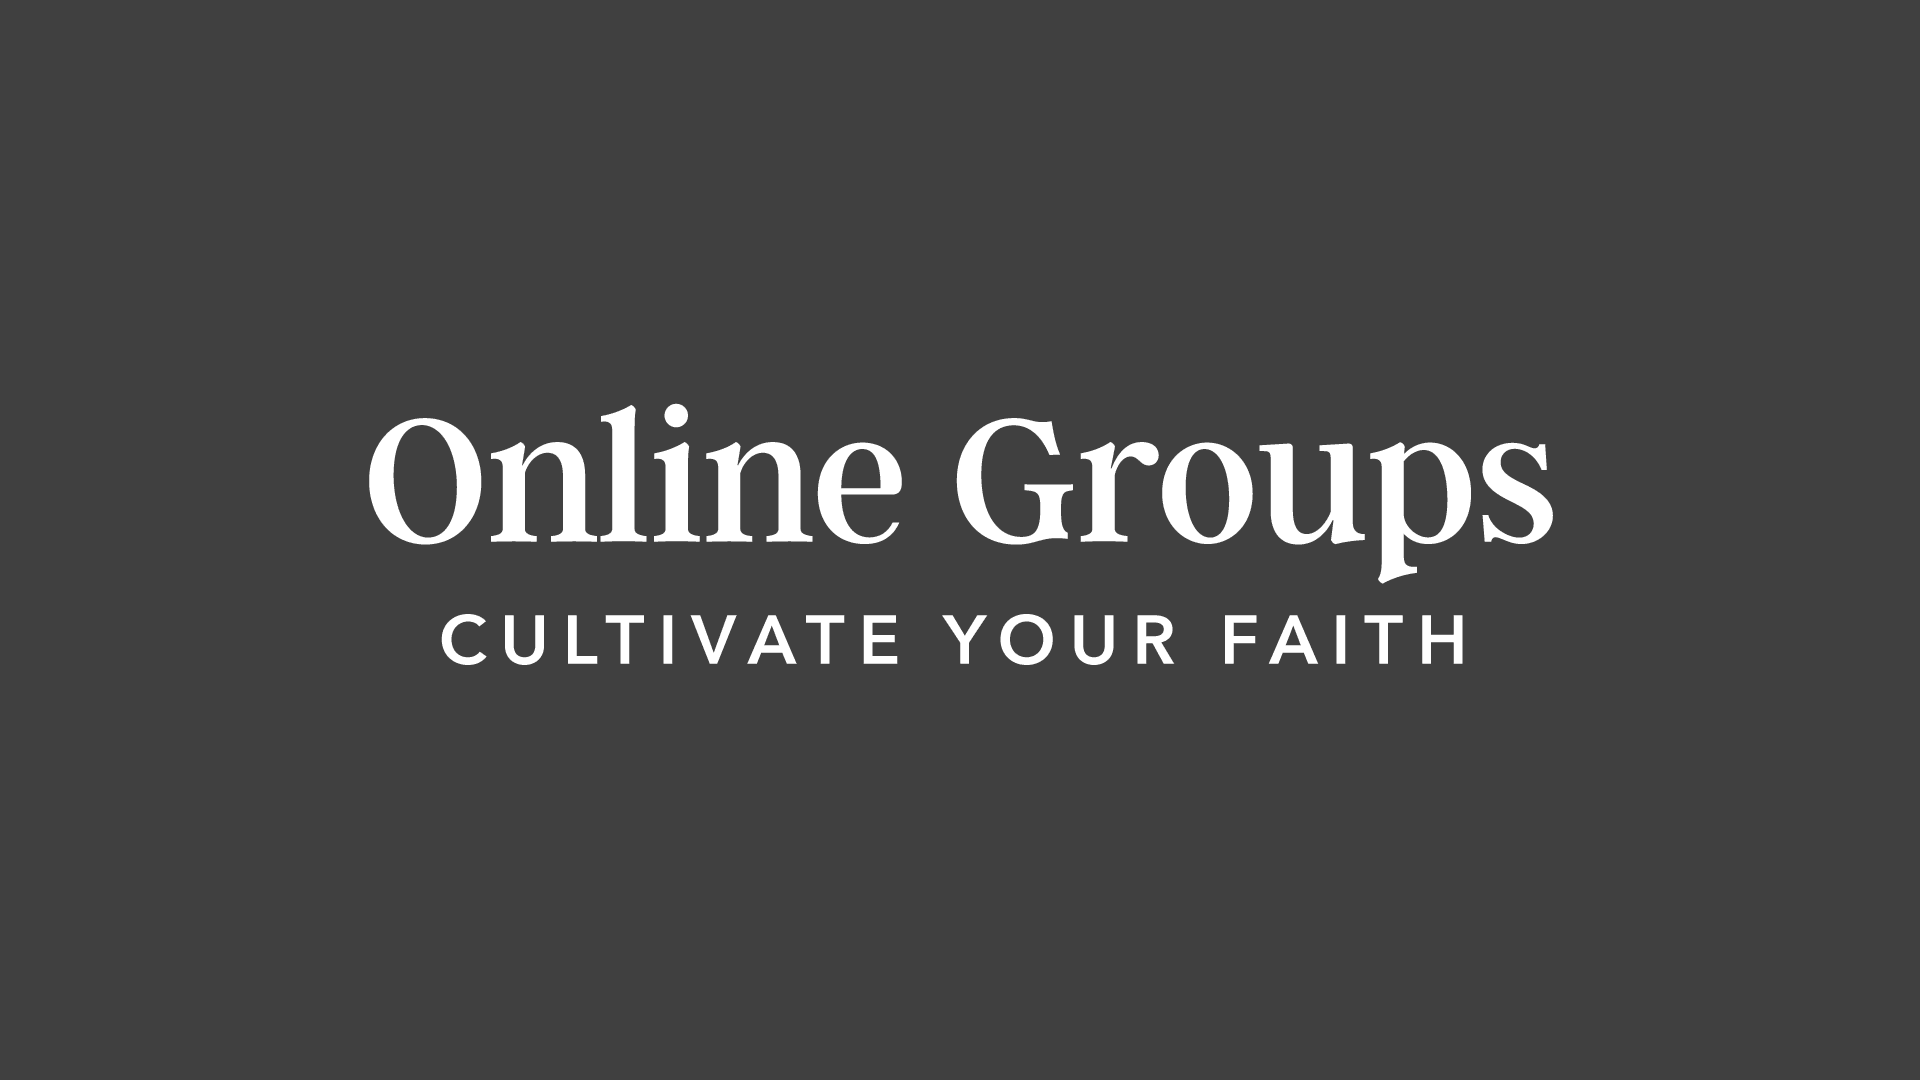 Online Small Group Interest Form